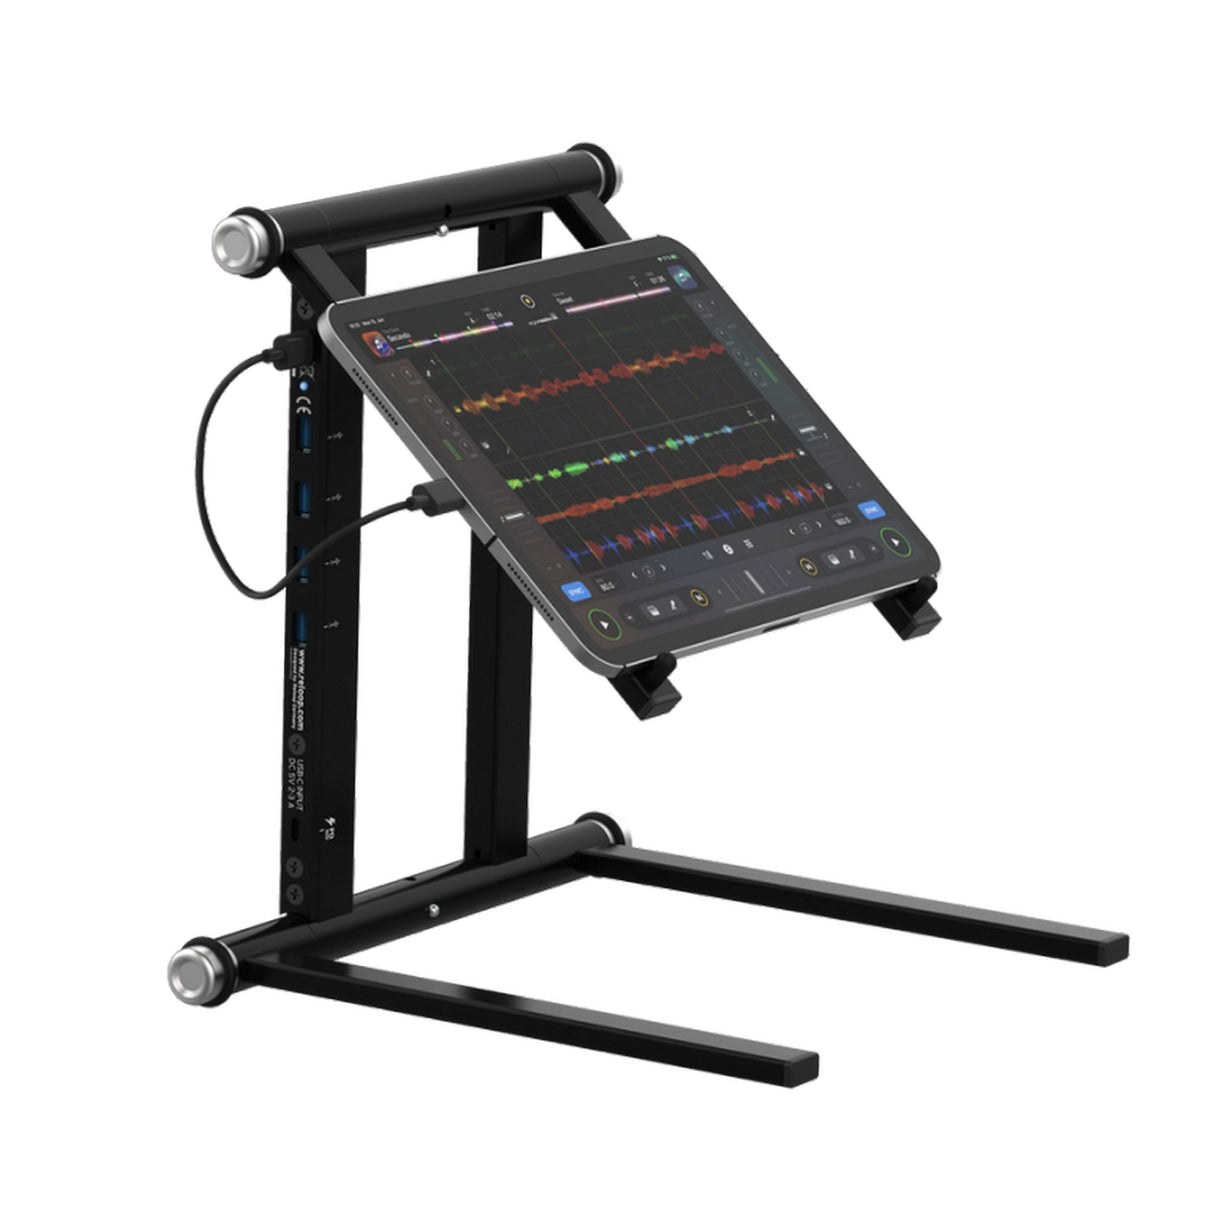 Reloop STAND-HUB Advanced Laptop Stand with USB-C PD Hub